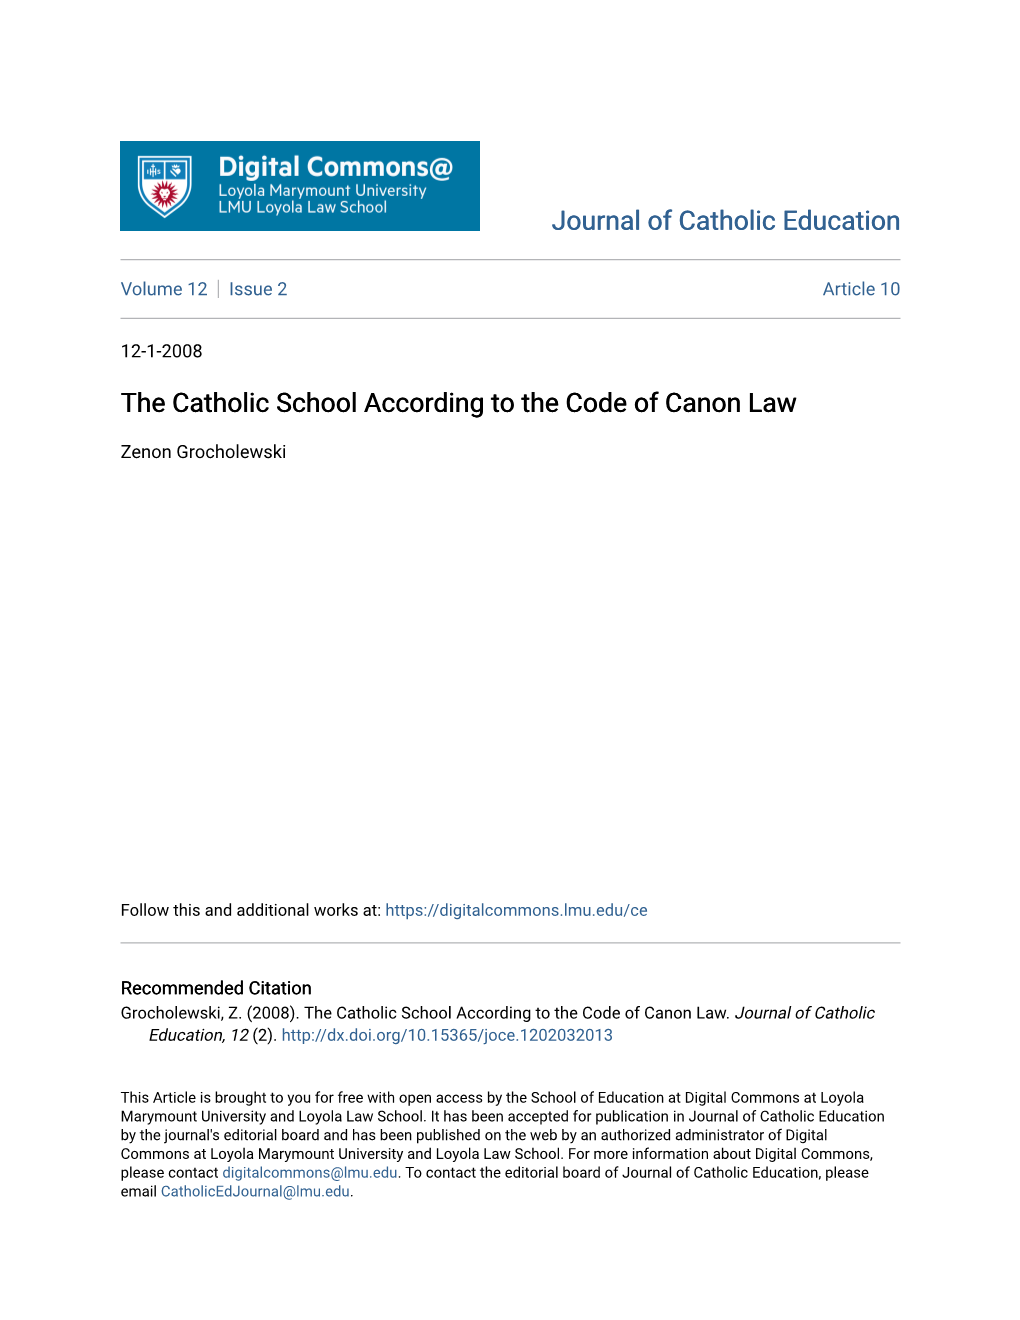 The Catholic School According to the Code of Canon Law